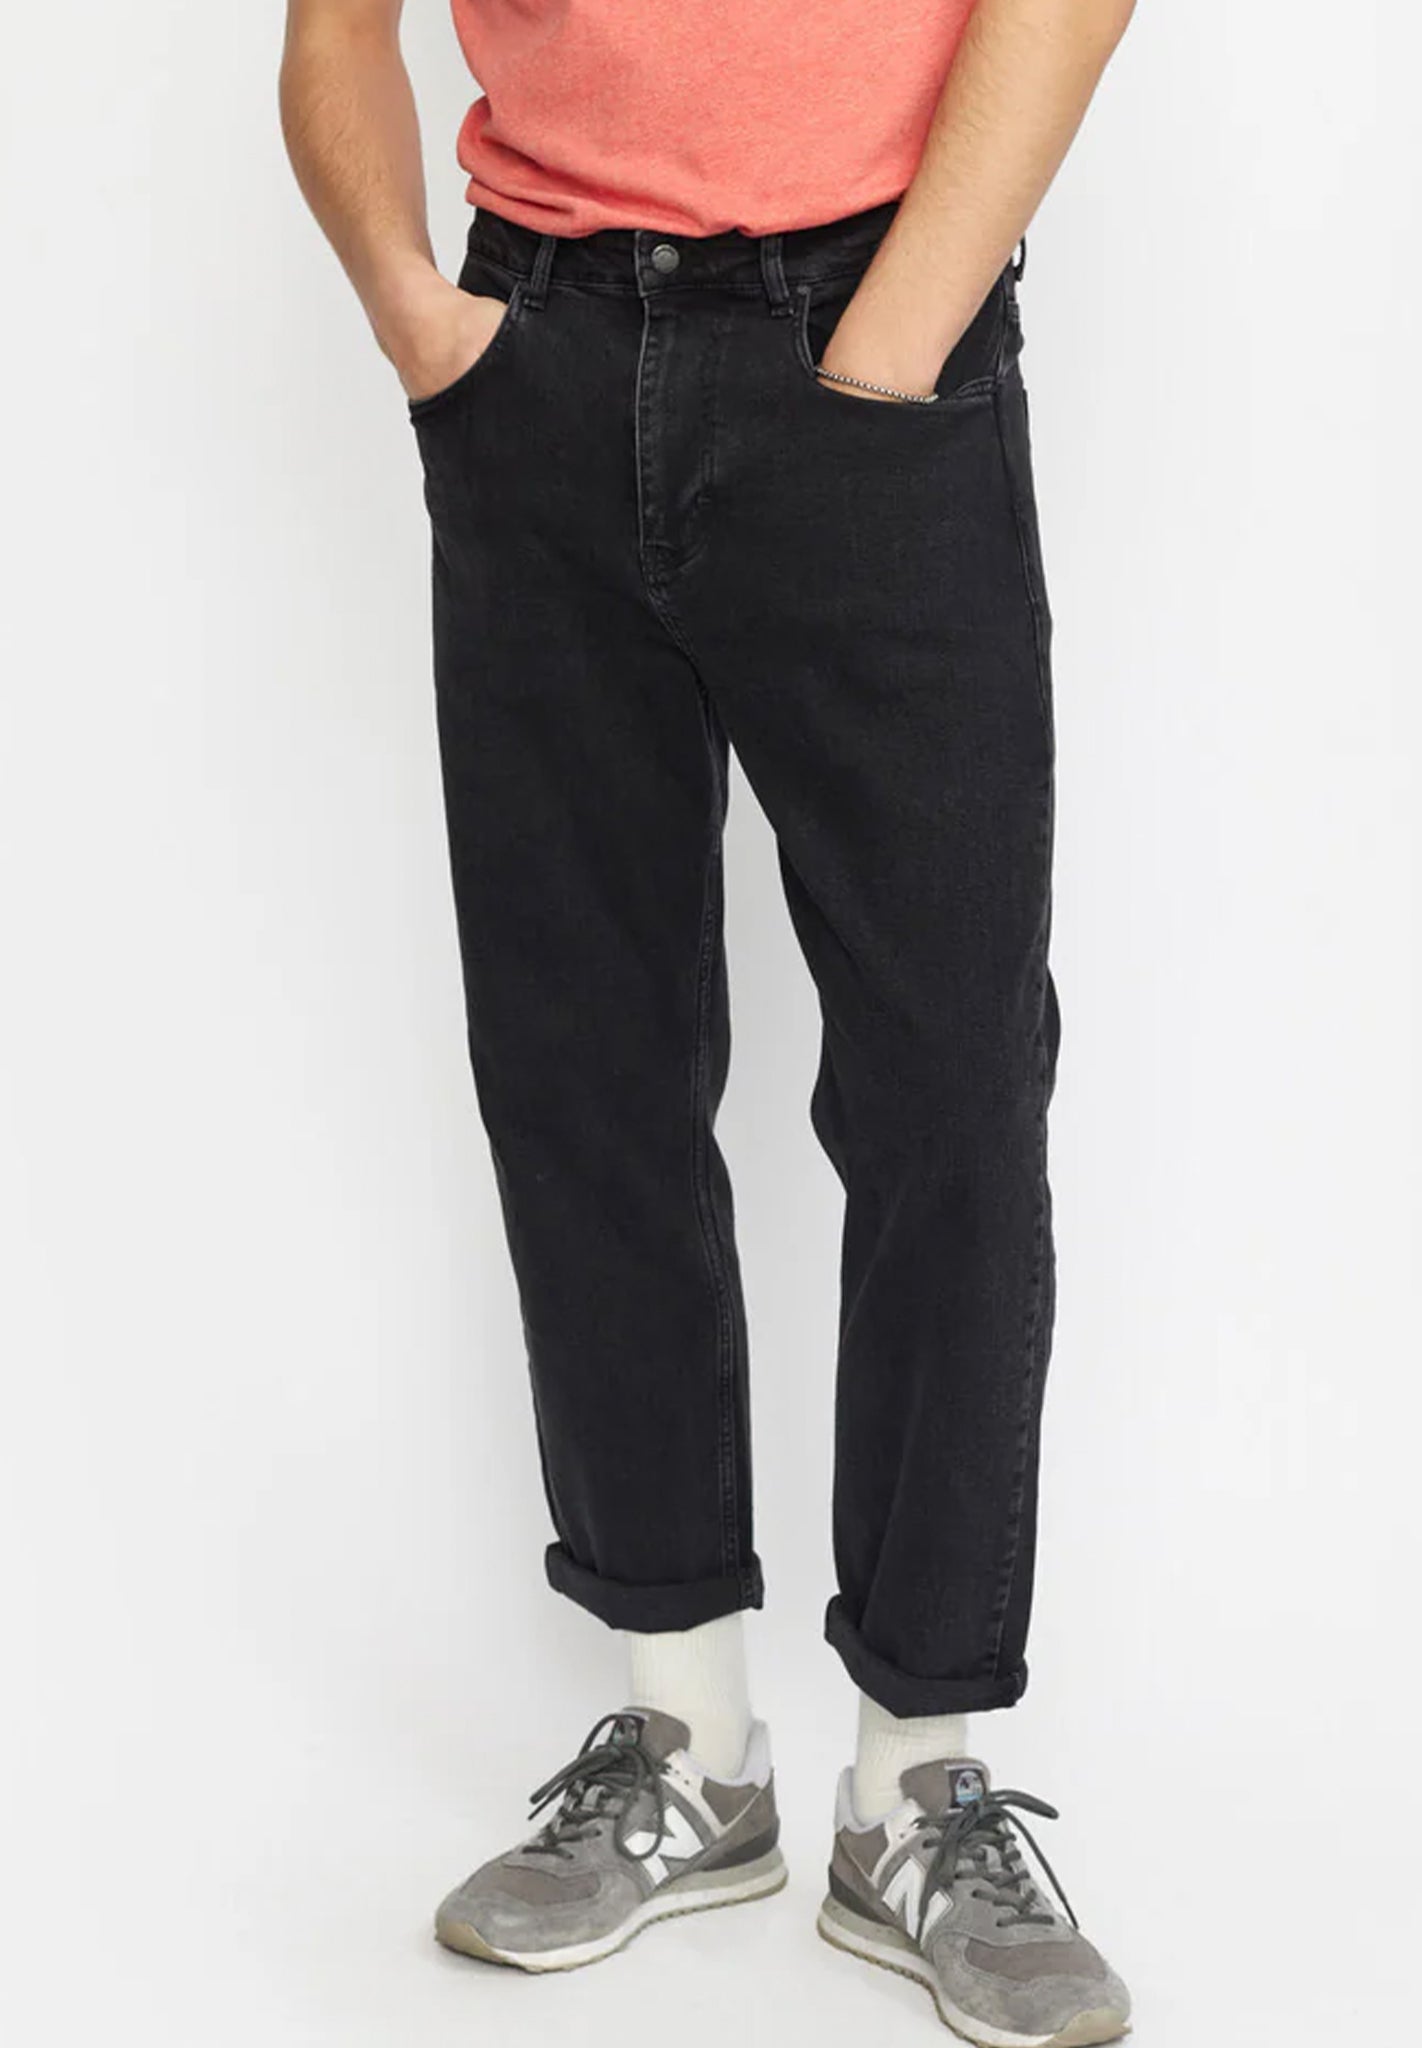 REVOLUTION - 5372 Relaxed Fit Jeans - BACKYARD